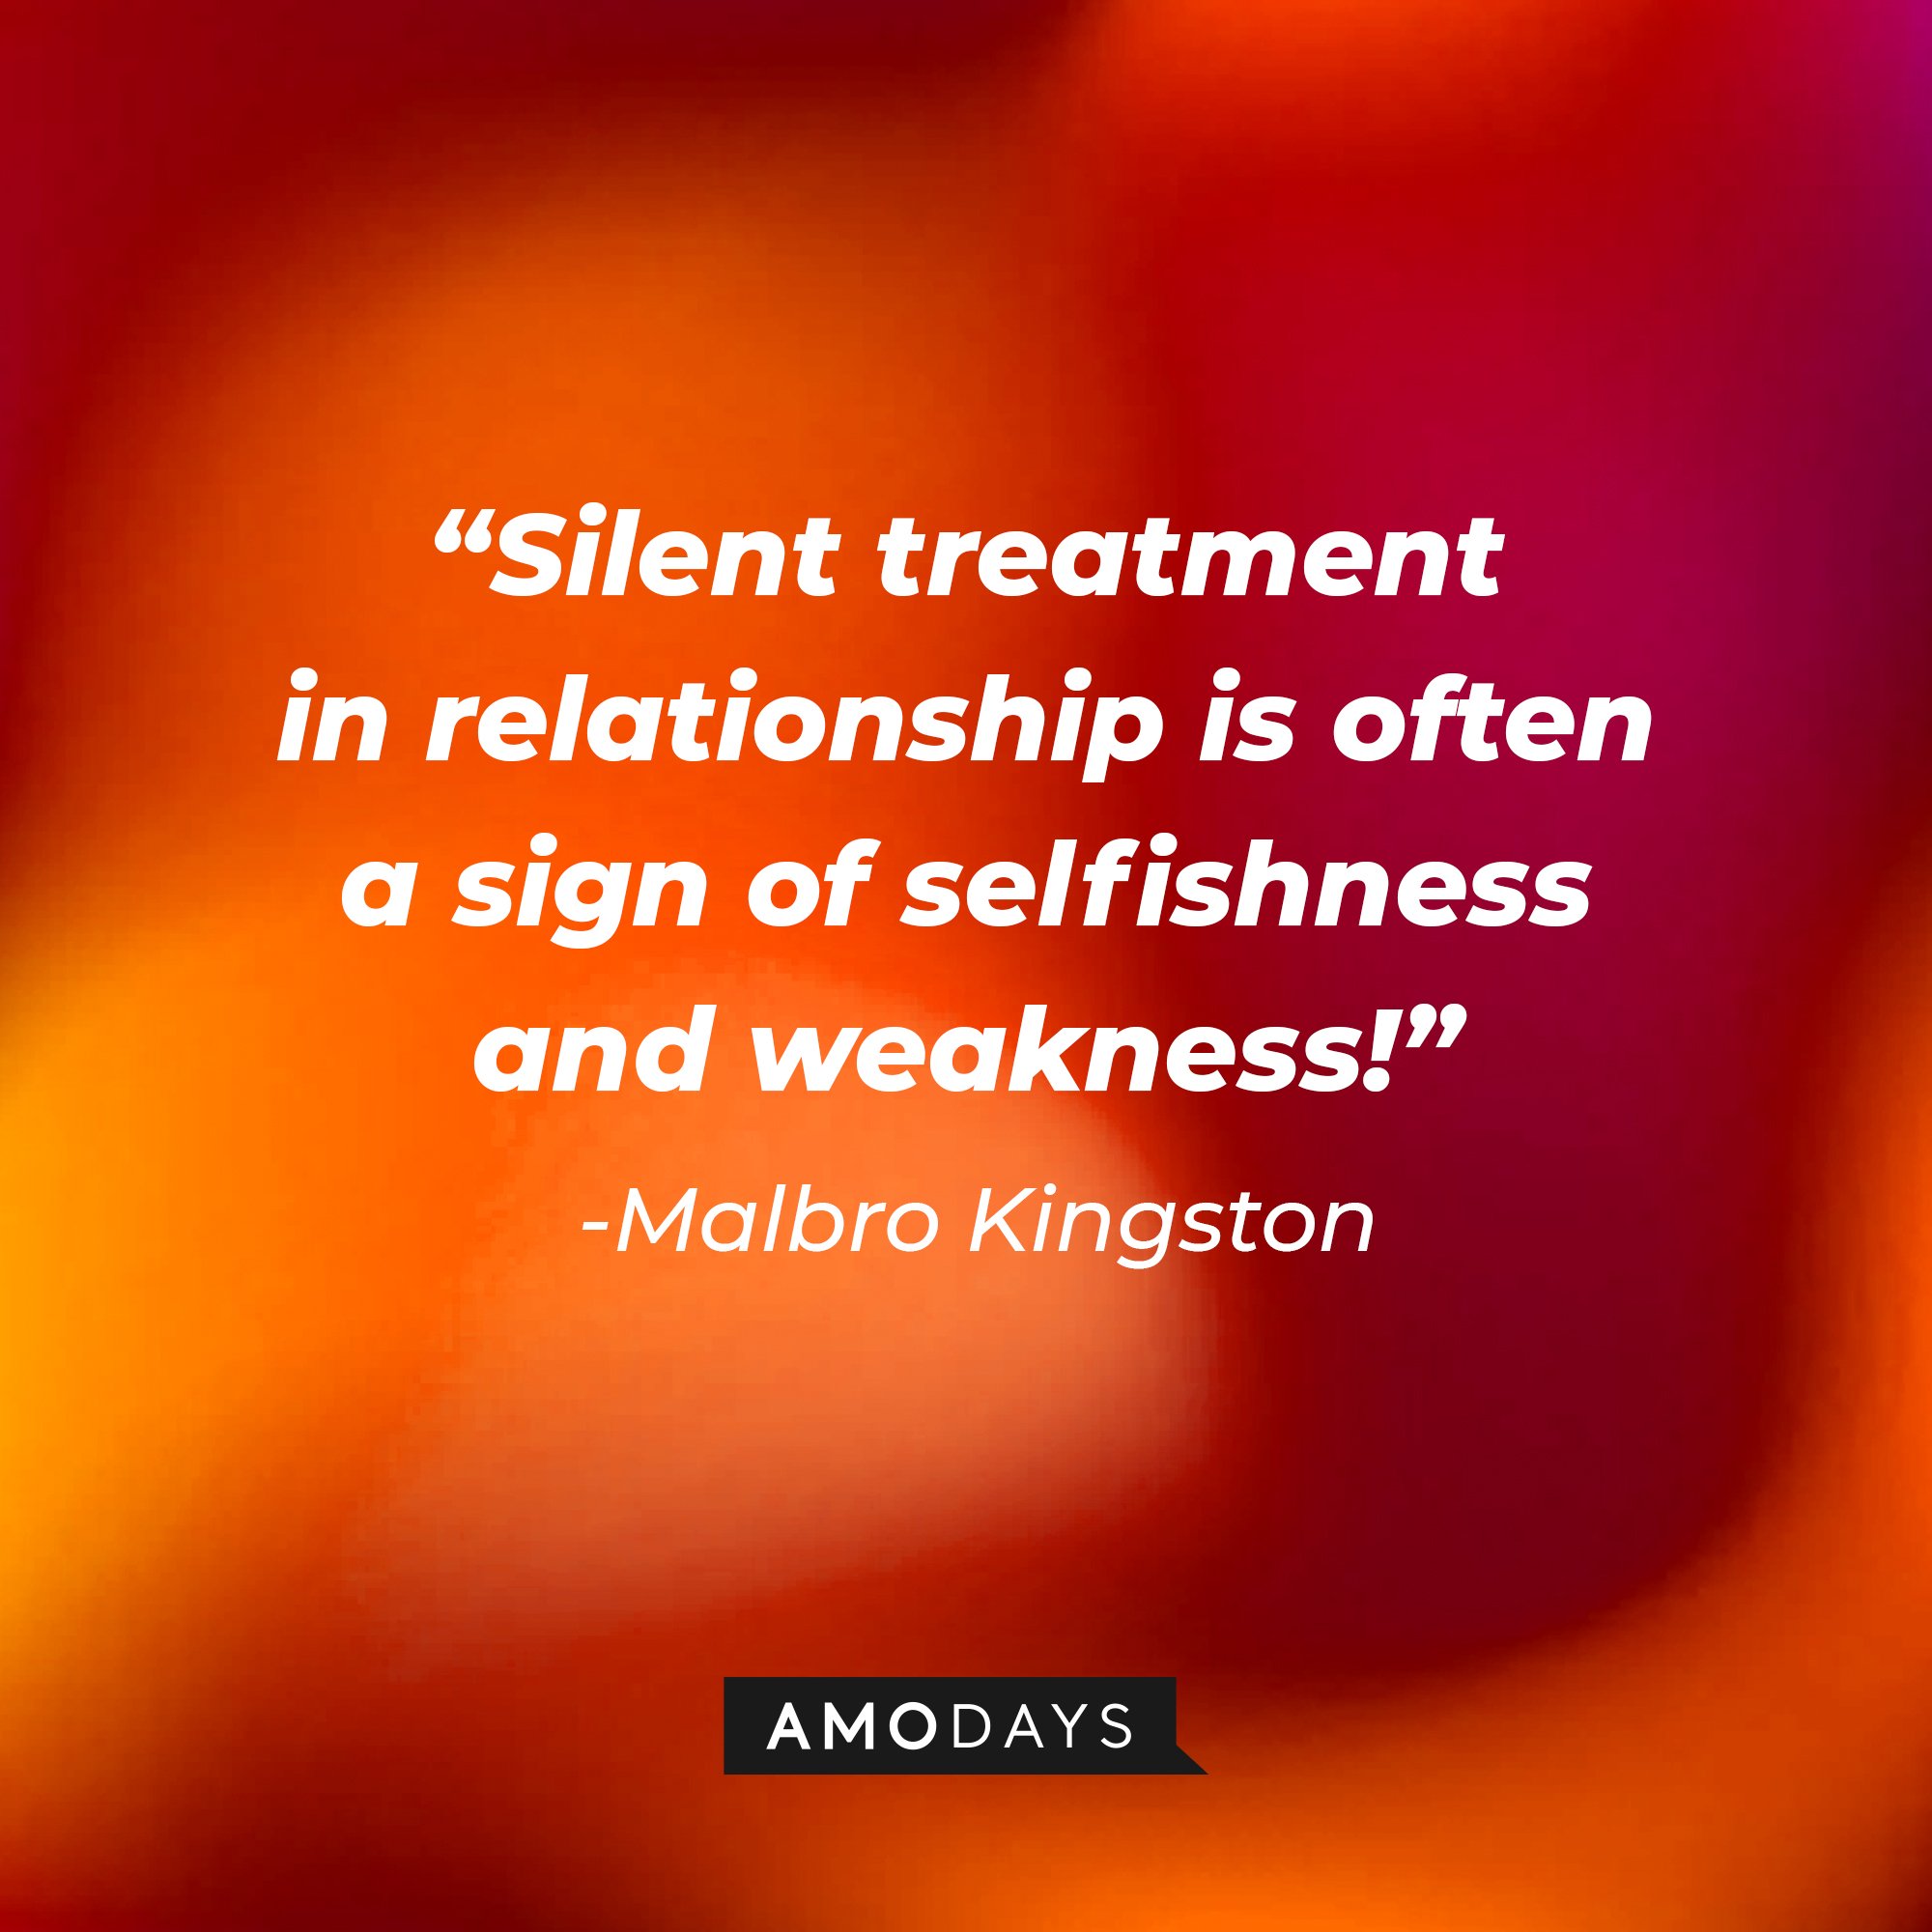 Malbro Kingston's quote:\\\\u00a0"Silent treatment in relationship is often a sign of selfishness and weakness!"\\\\u00a0| Image: AmoDays